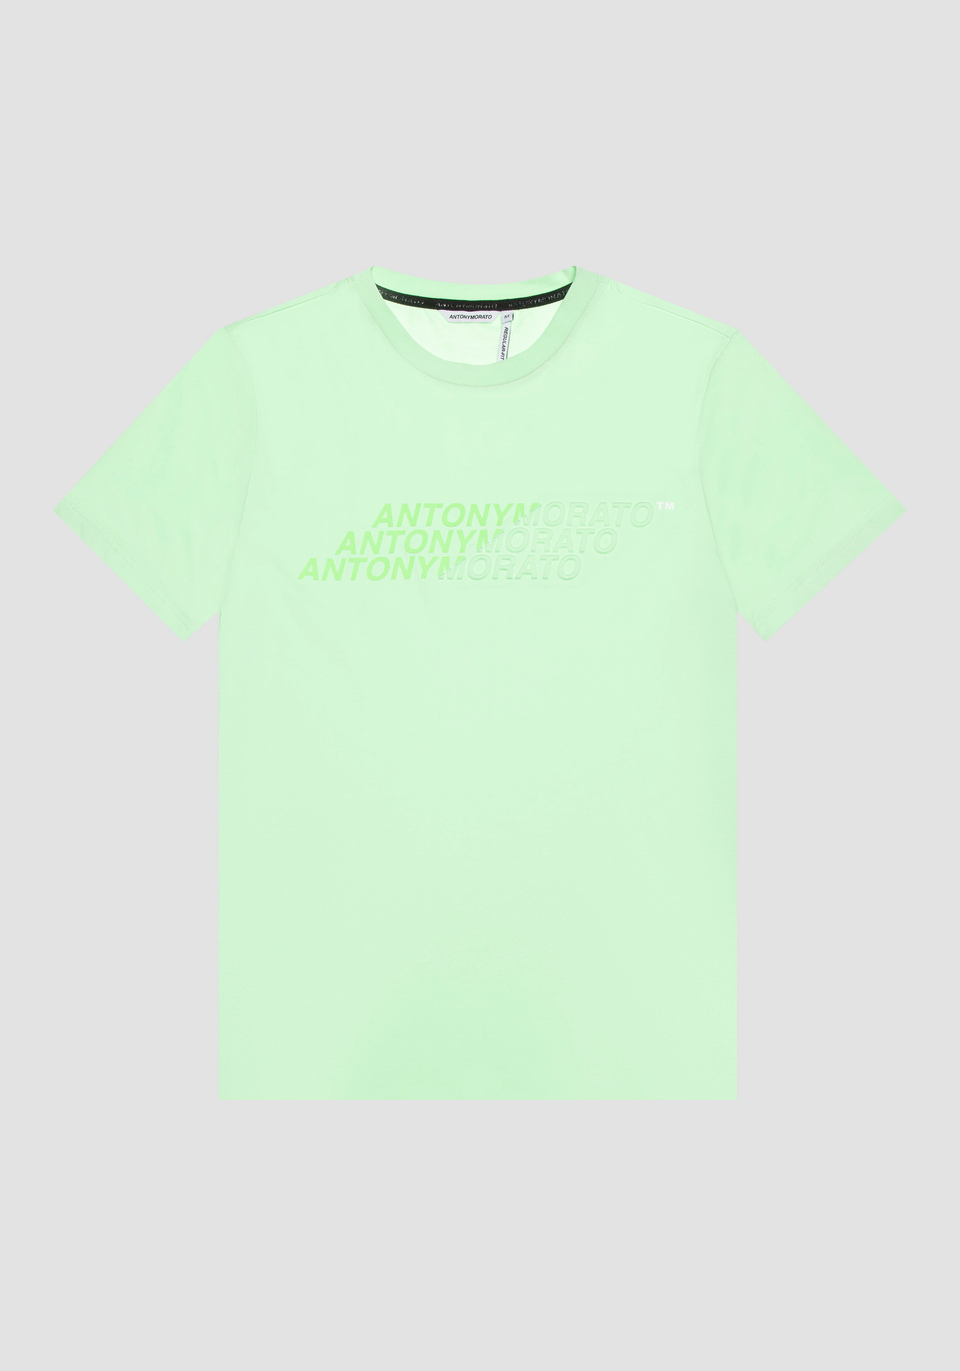 REGULAR FIT T-SHIRT IN PURE COTTON WITH FRONT LOGO PRINT - Antony Morato Online Shop